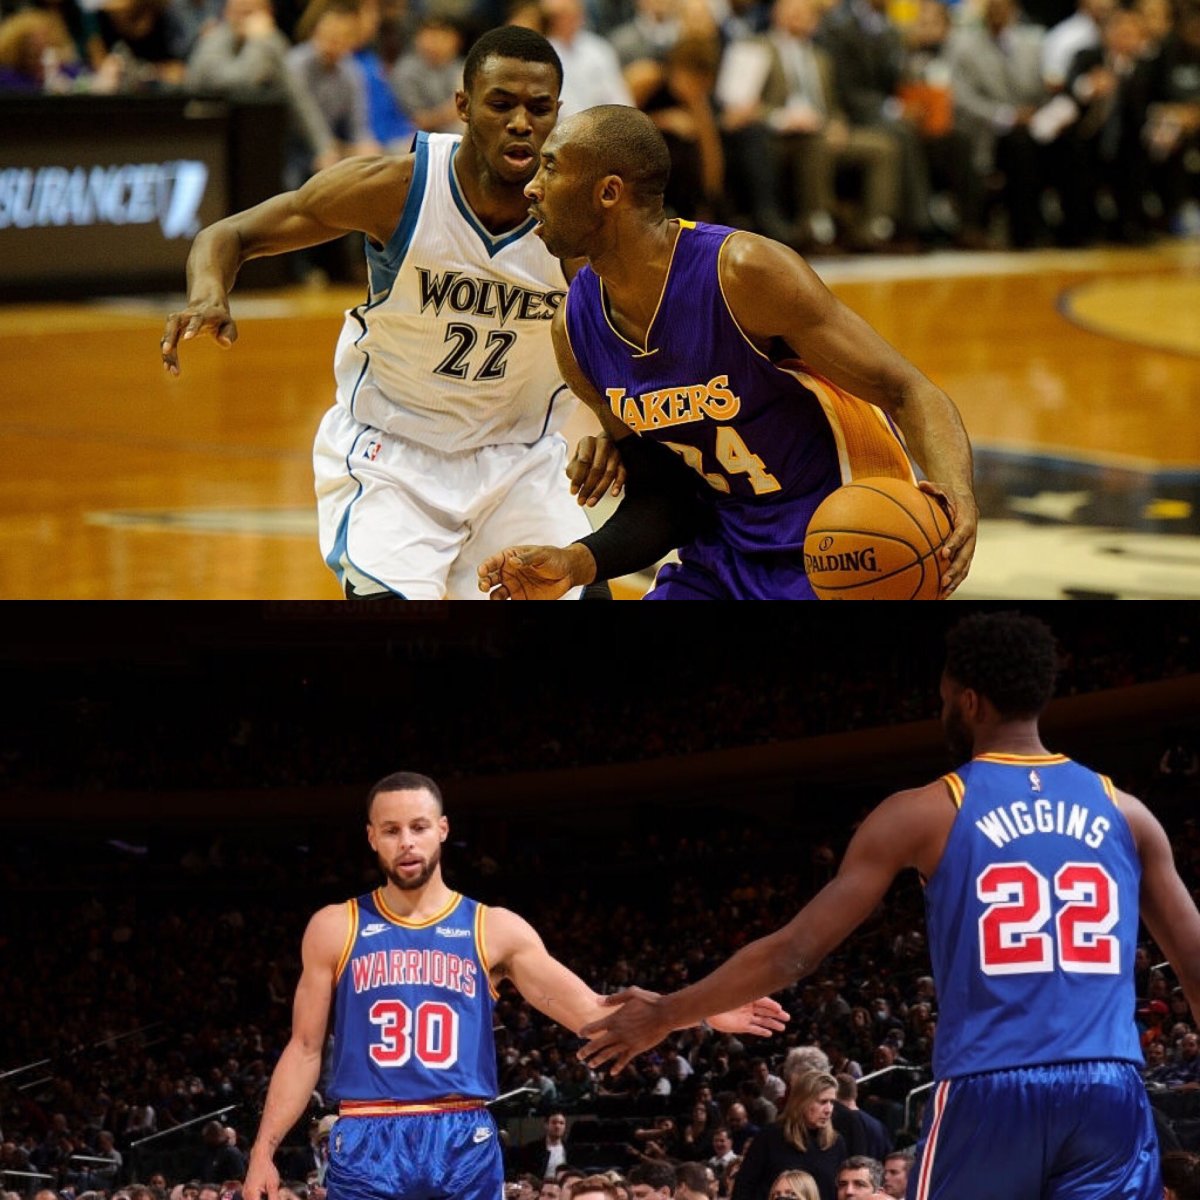 Andrew Wiggins Was There When Kobe Bryant Surpassed Michael Jordan's Scoring Record And When Stephen Curry Broke Ray Allen's Three-Point Record